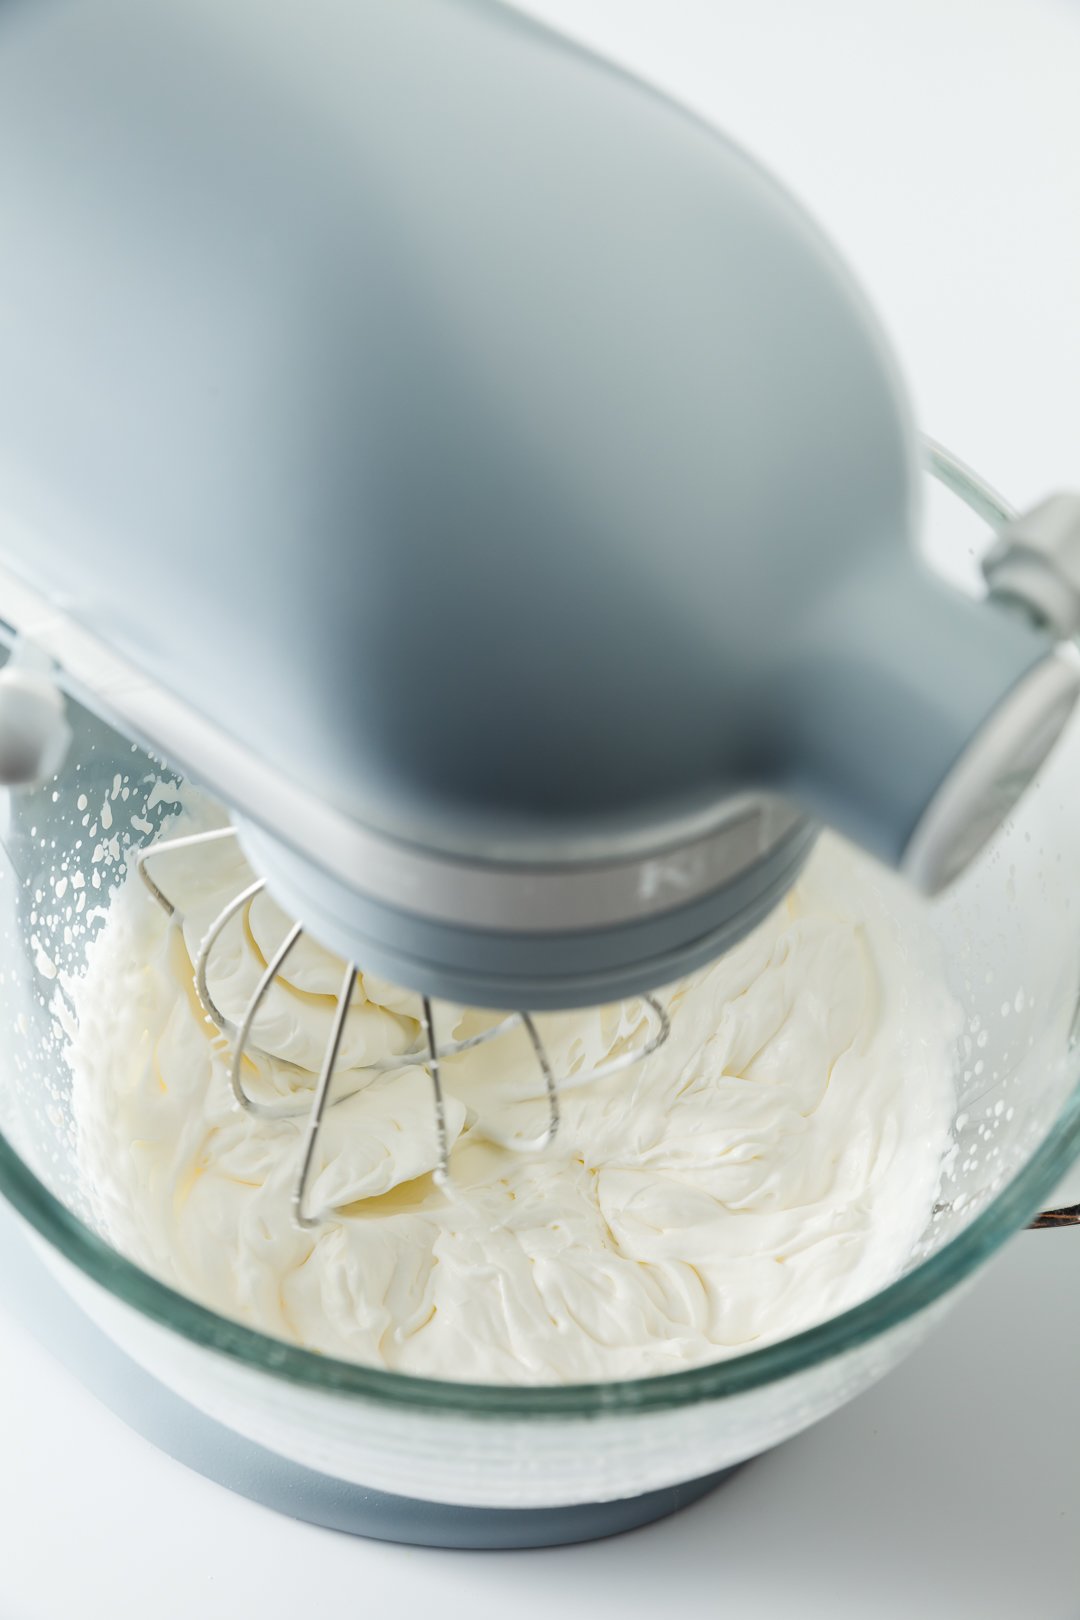 KitchenAid mixer filled with whipped cream